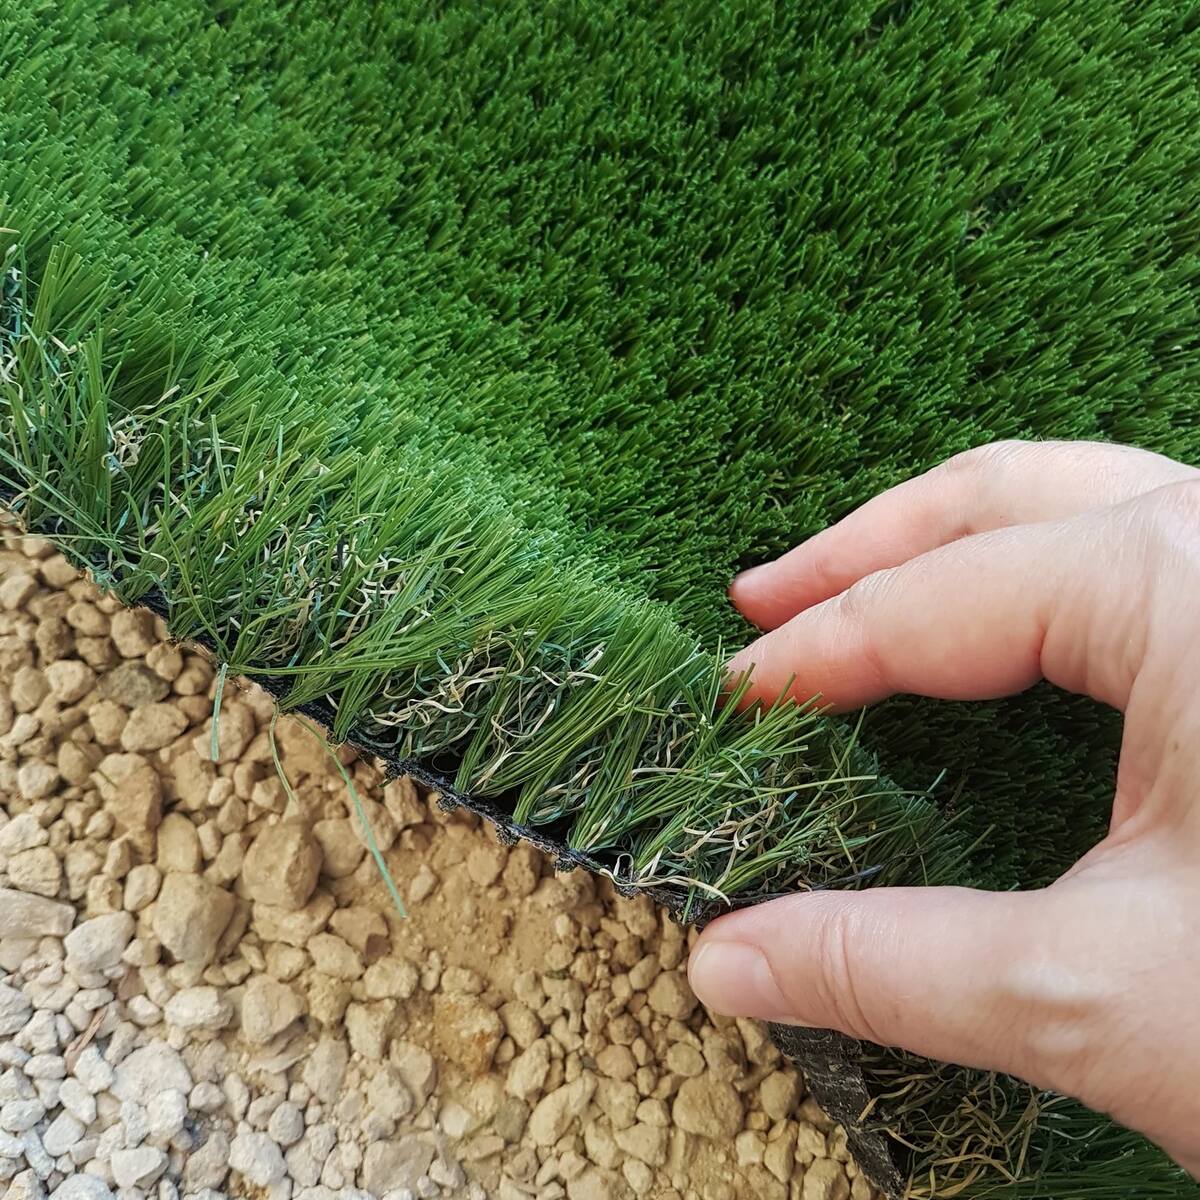 How To Lay Artificial Grass On Dirt